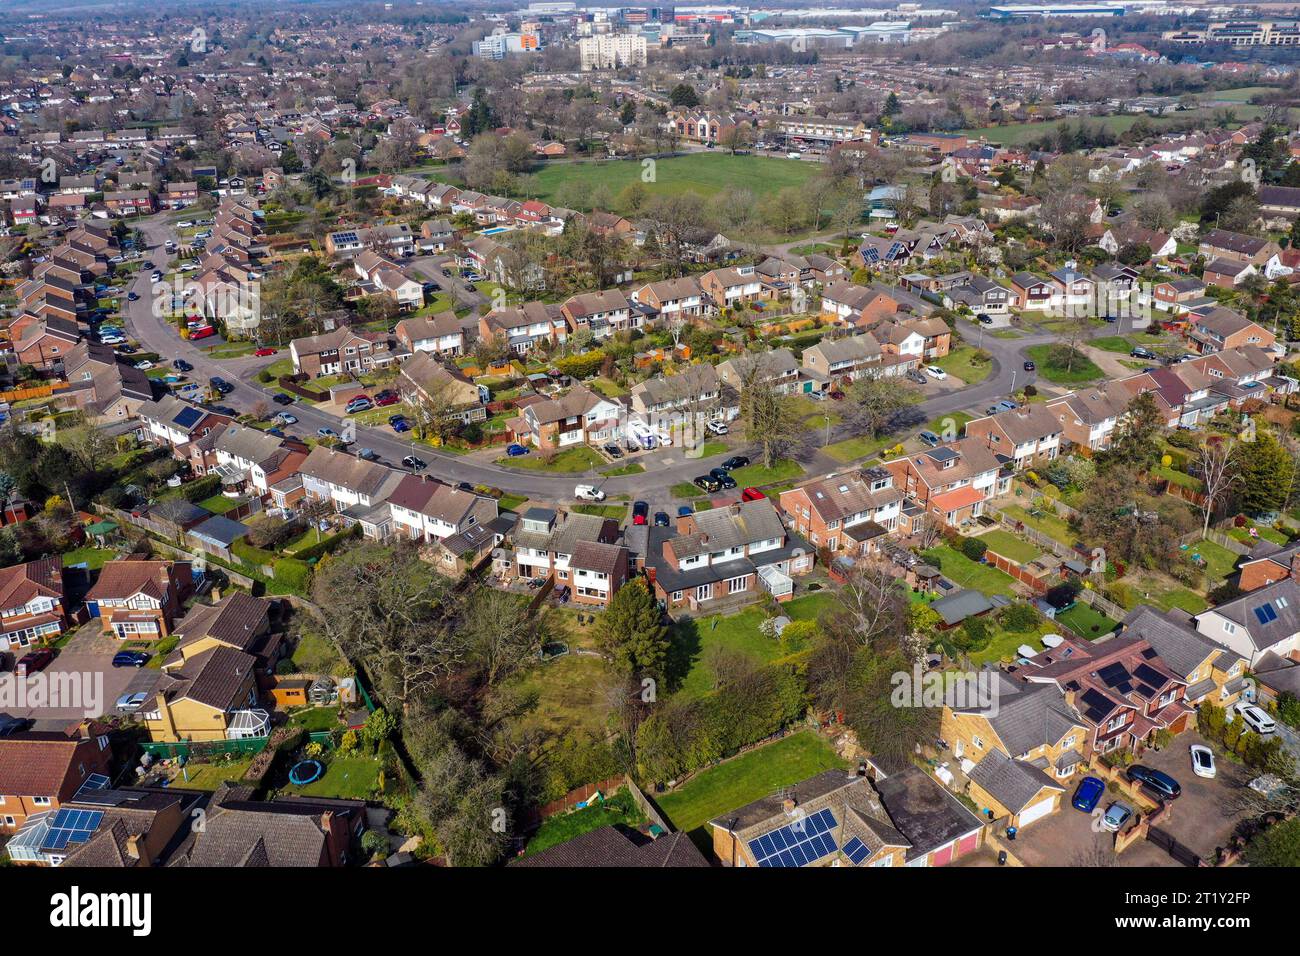 File photo dated 27/03/2020 of an aerial view of Leverstock Green, near Hemel Hempstead. This year saw the weakest month of October for house sellers' asking price growth since the 2008 financial downturn, according to a property website. Across Britain, the average new seller asking price increased by 0.5% (£1,950) month-on-month in October, to reach £368,231, Rightmove said. But the increase in October 2023 was the smallest average asking price rise for this time of year since 2008, and well below the average increase of 1.4% recorded in October over the past 20 years, the website said. Issu Stock Photo